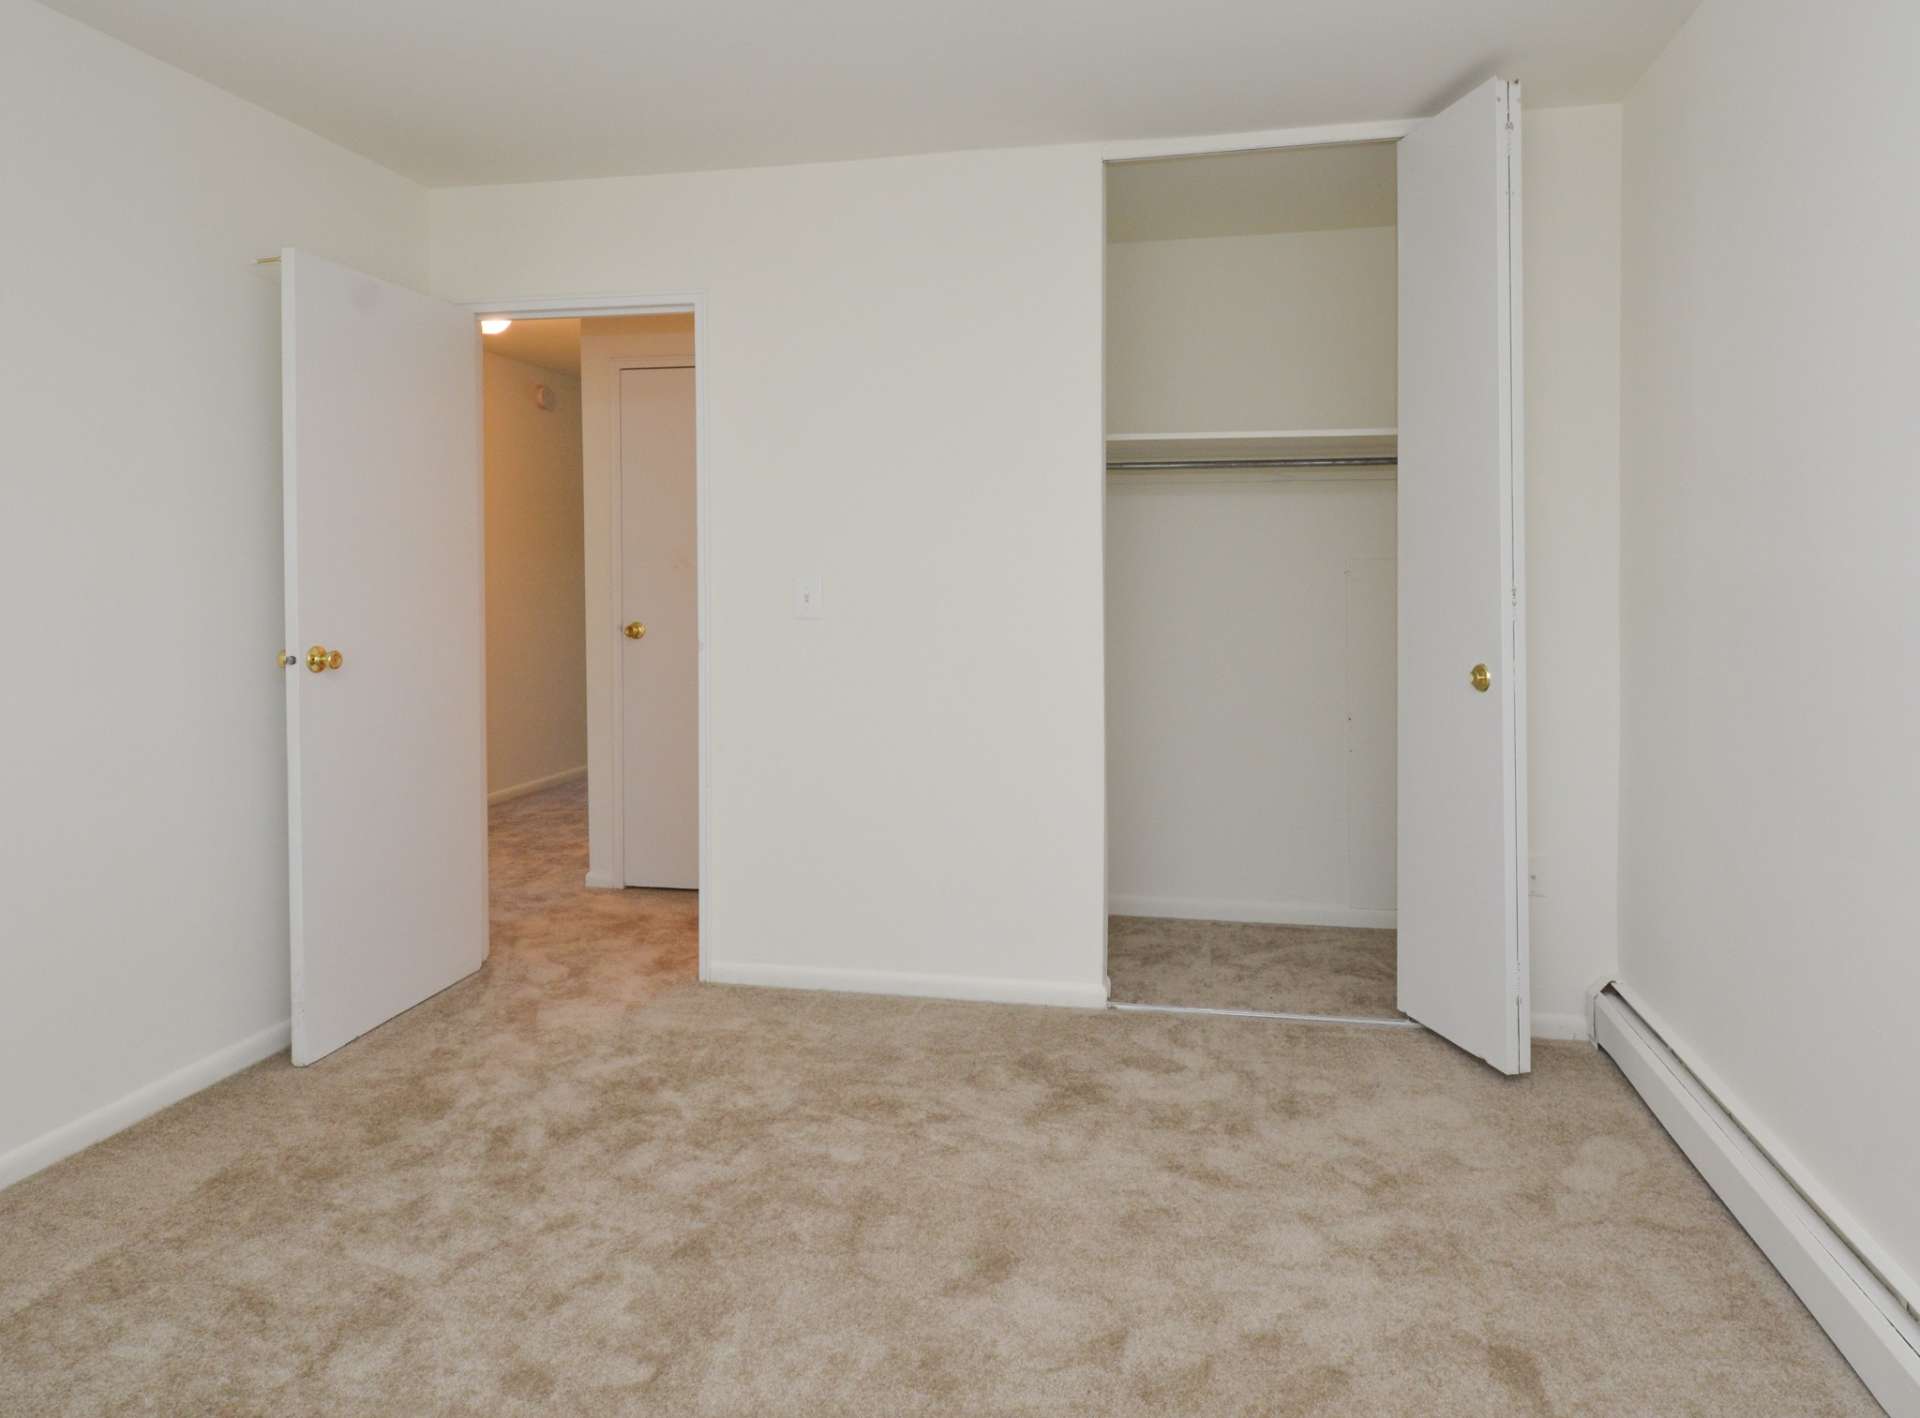 Bedroom with beige carpets and a closet in an apartment in Dover, DE.